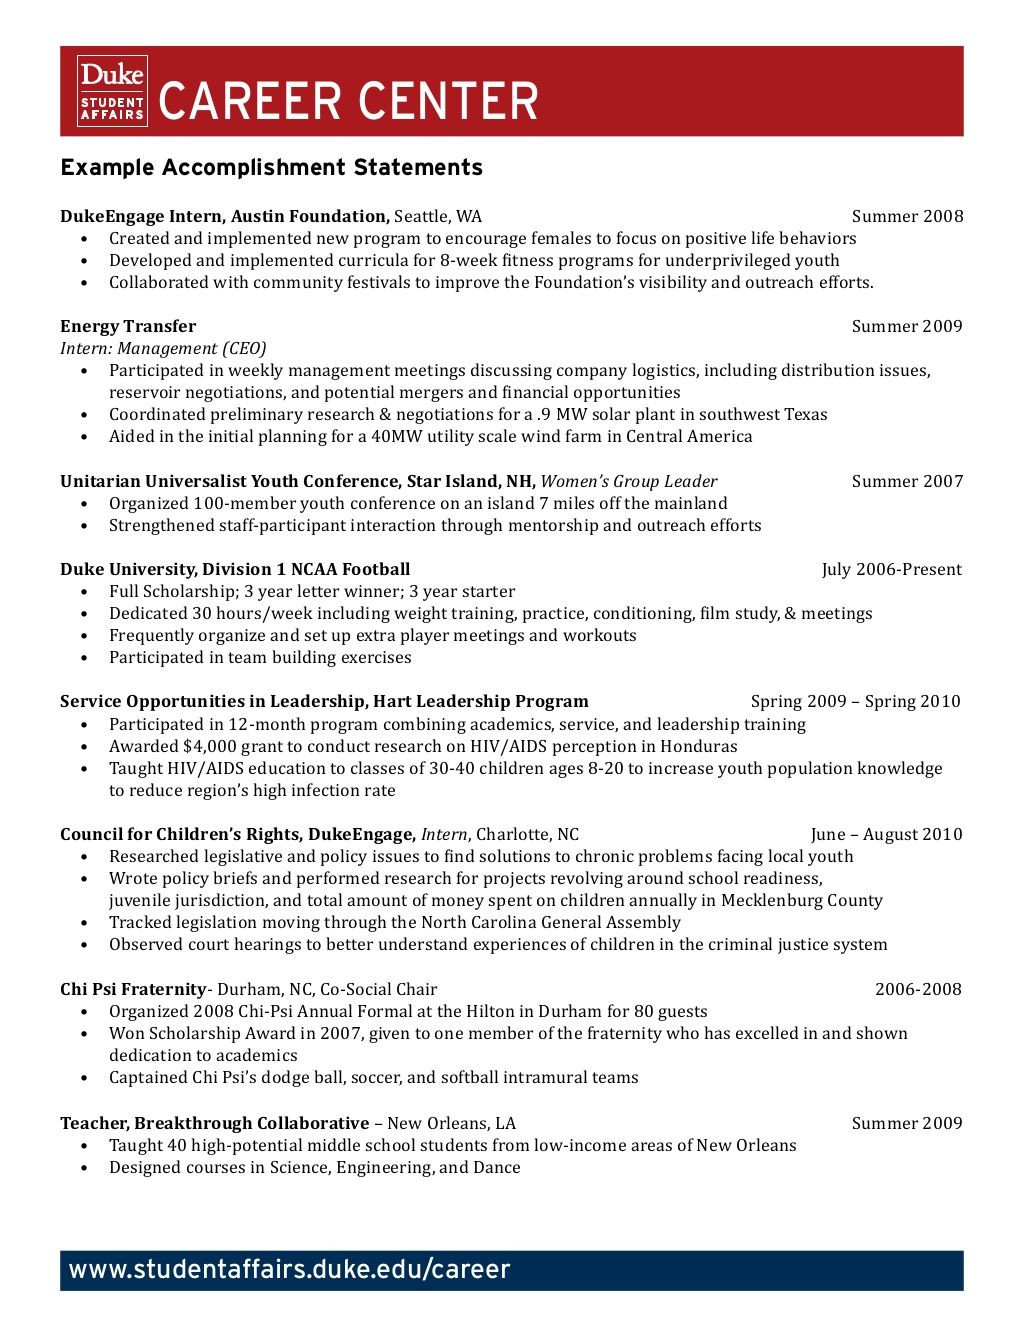 Sample Resume with A Section On Accomplishments Example Accomplishment Statements Career Counseling, Career …